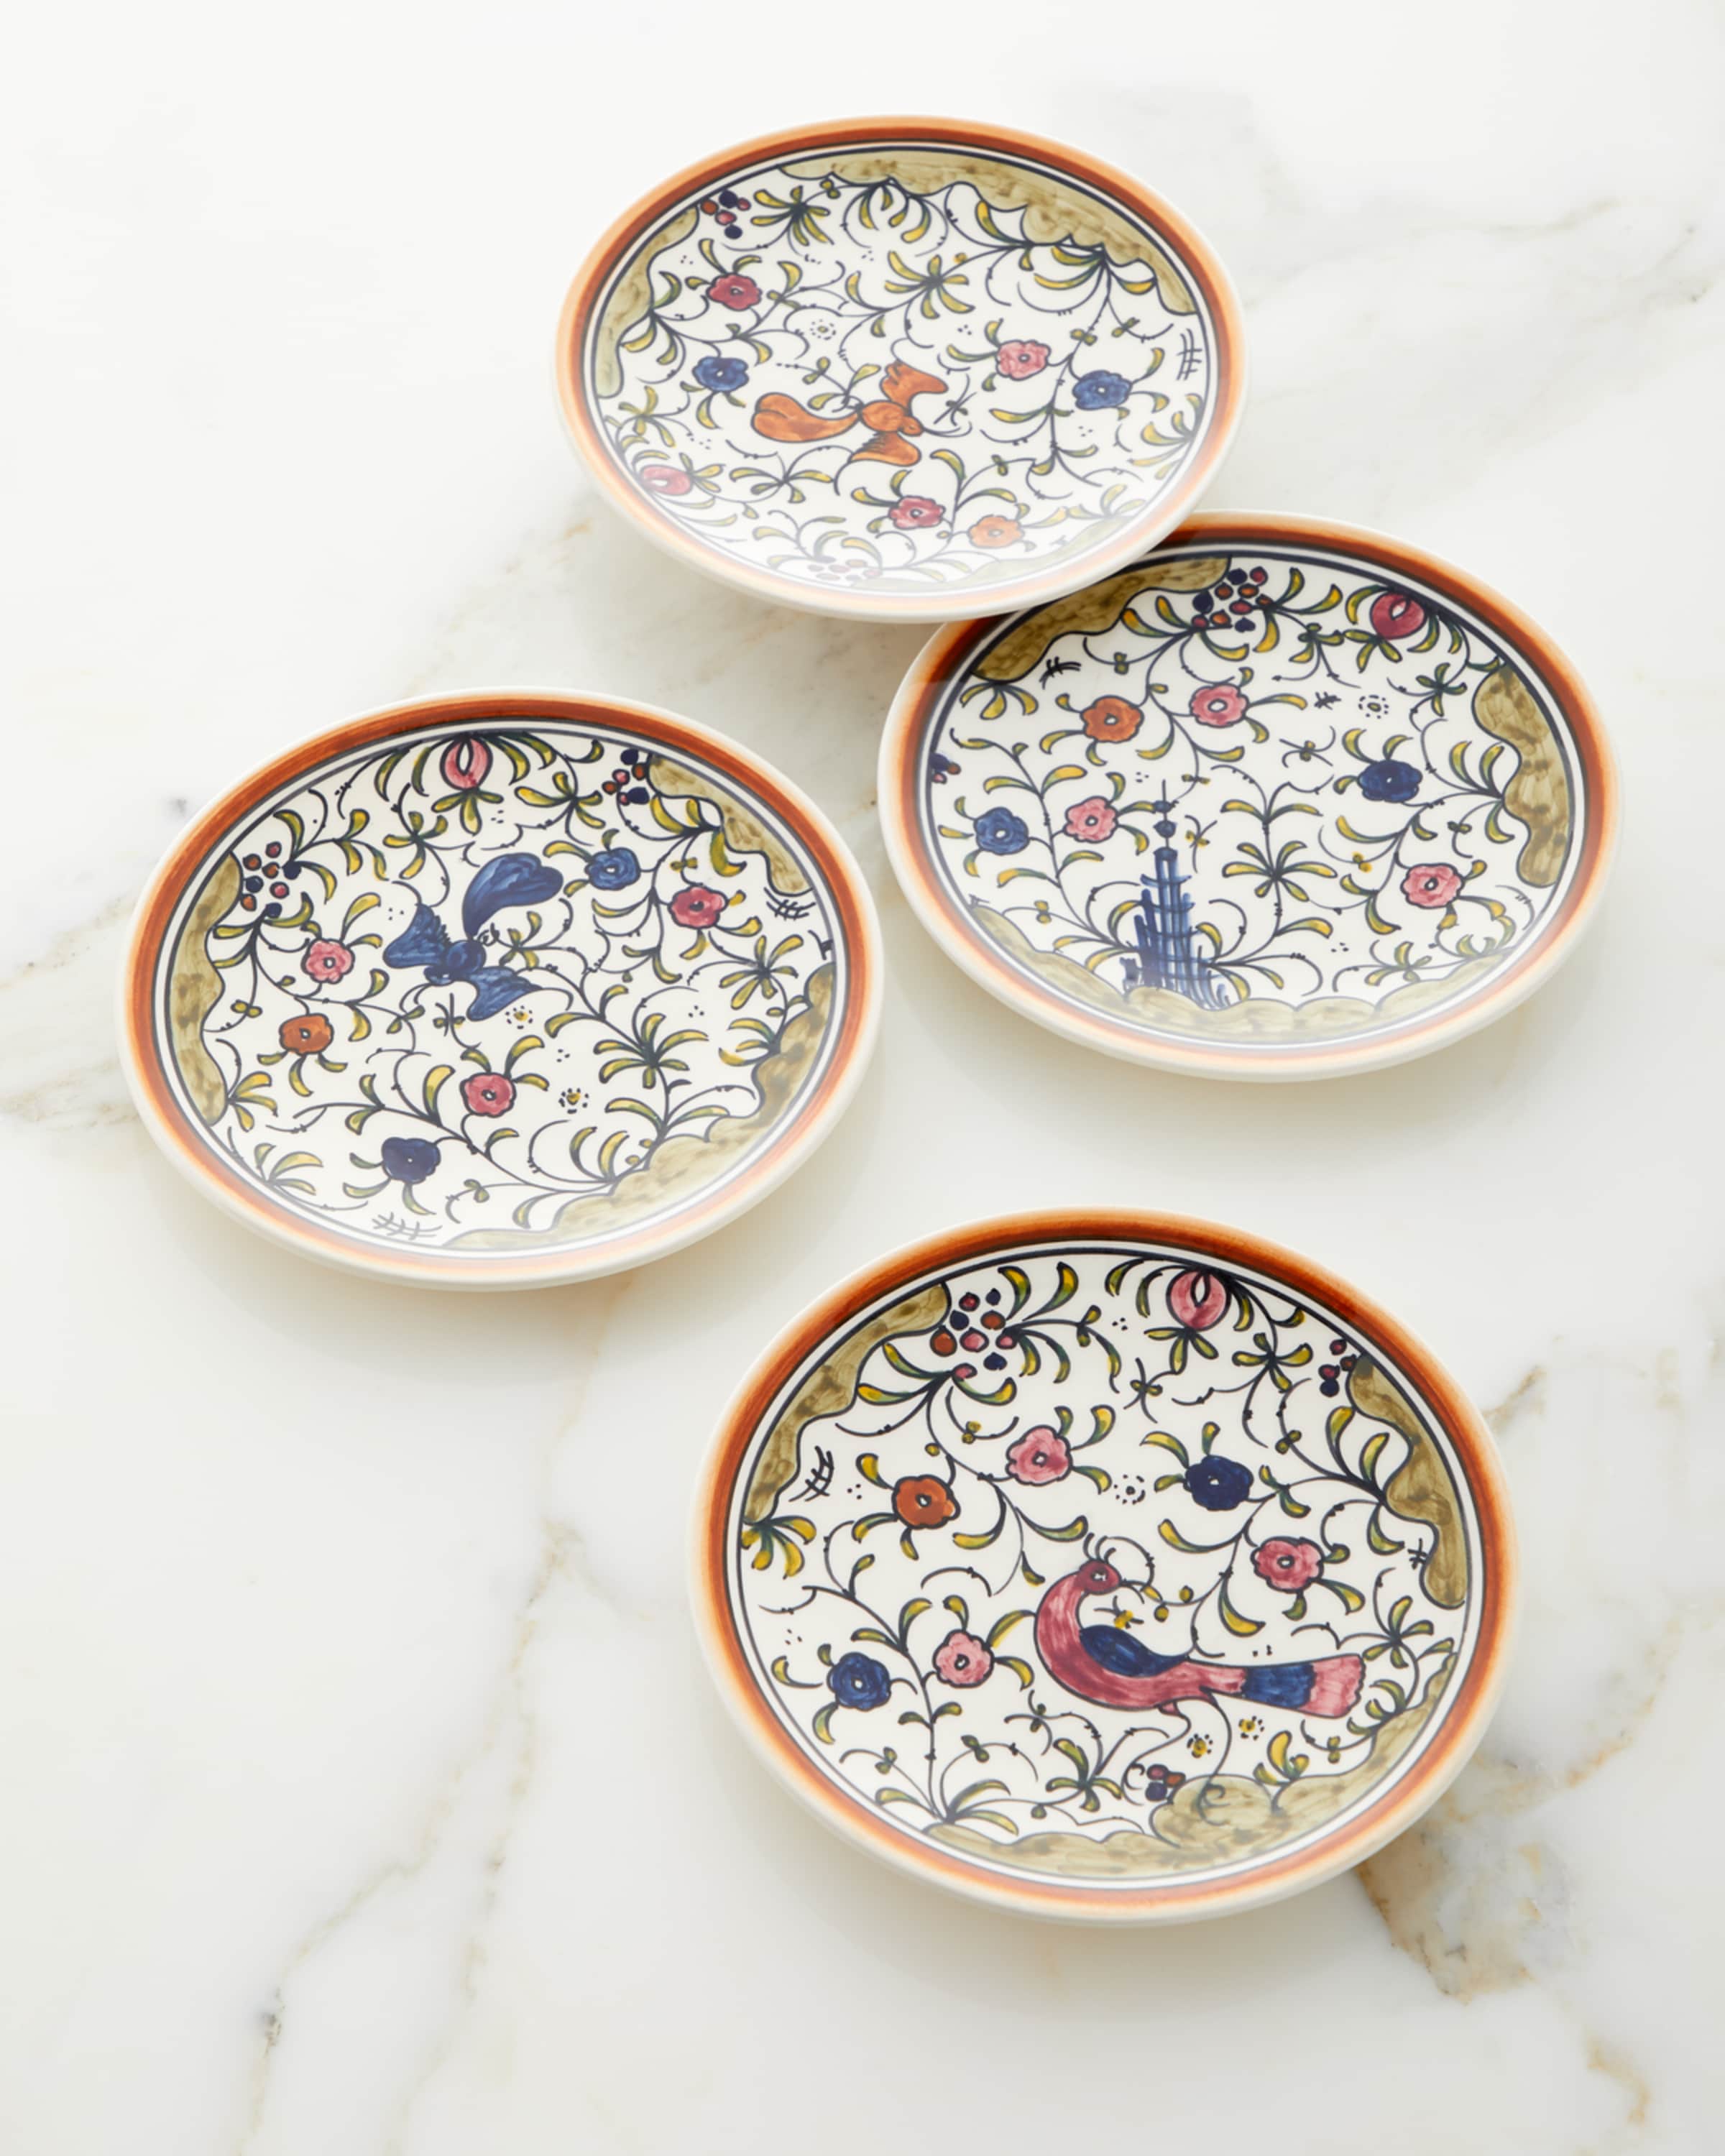 Neiman Marcus Pavoes Appetizers Plates, Set of 4